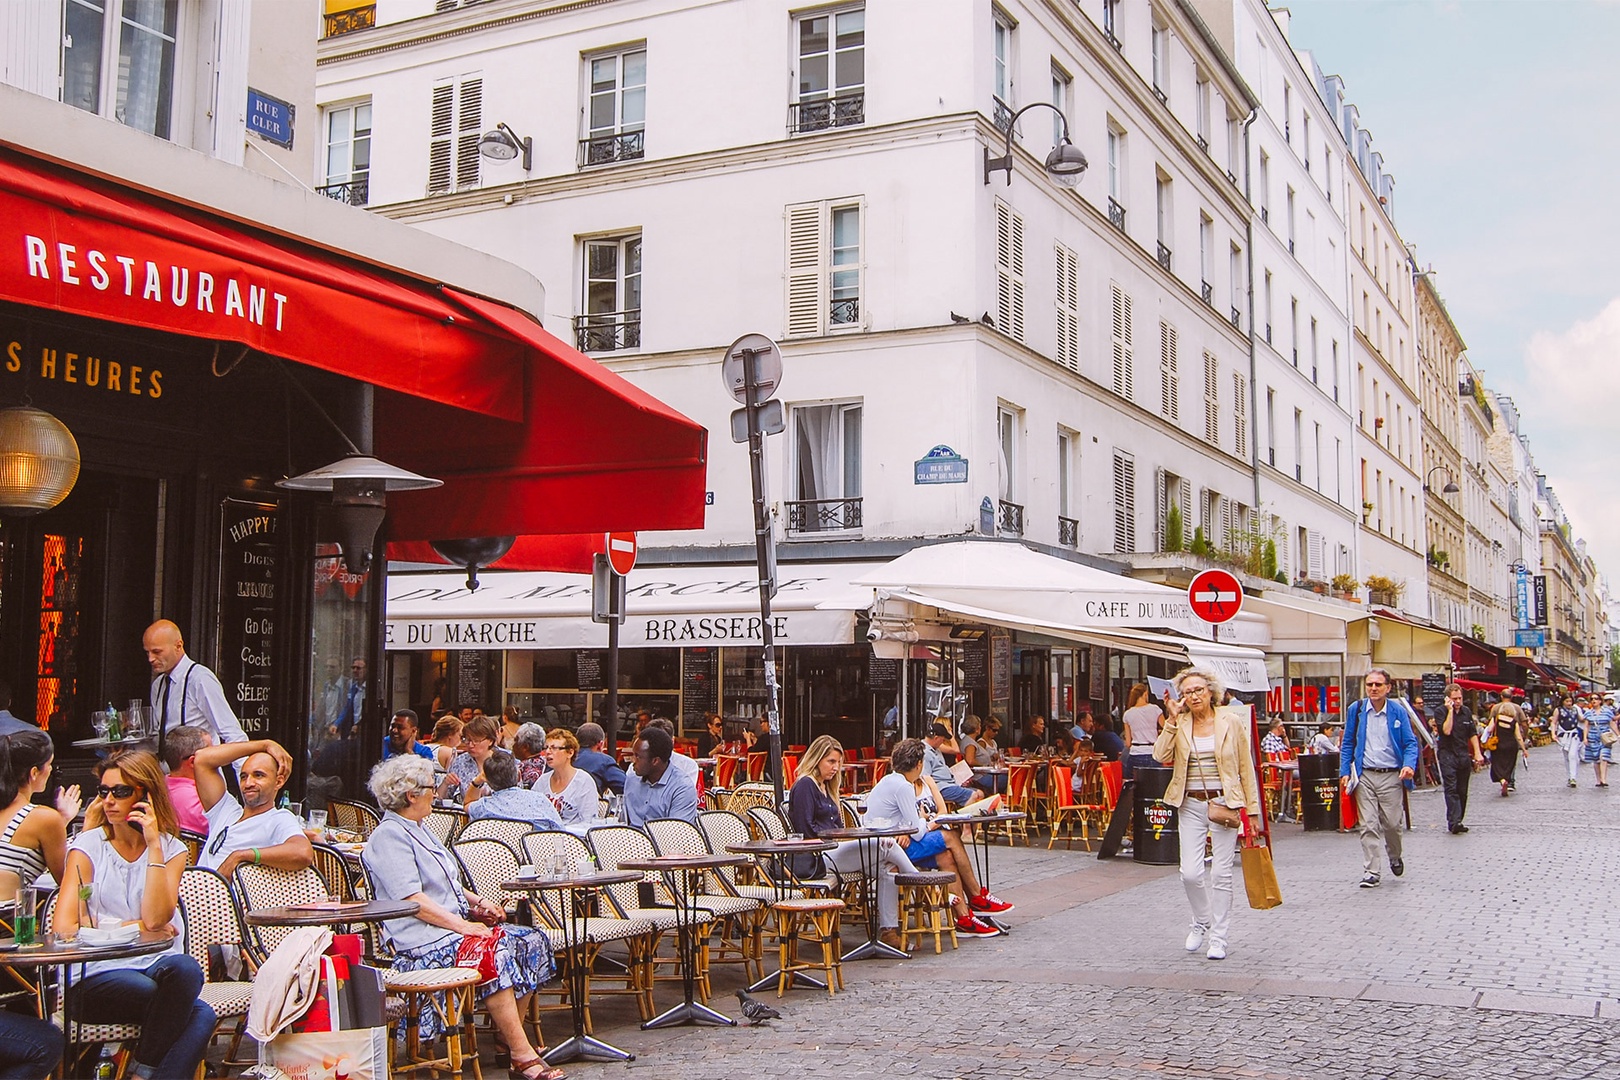 Enjoy lunch and people watching at Cafe Central on rue Cler.